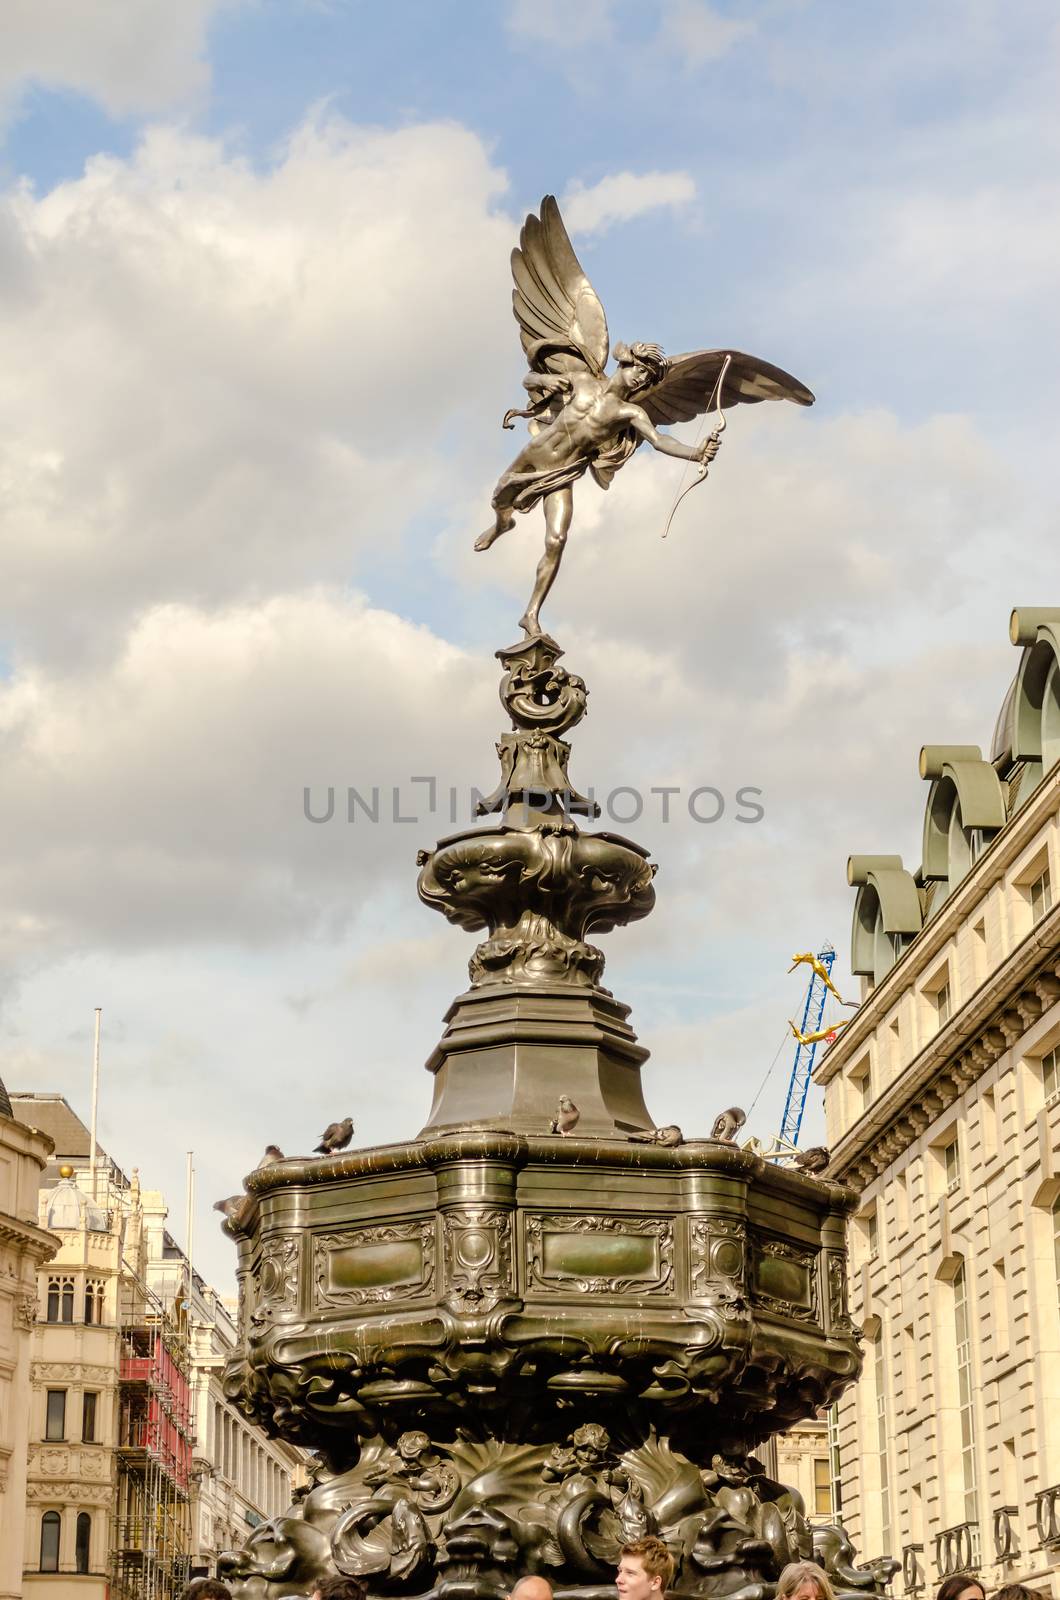 Eros Statue at Piccadilly Circus, London by marcorubino